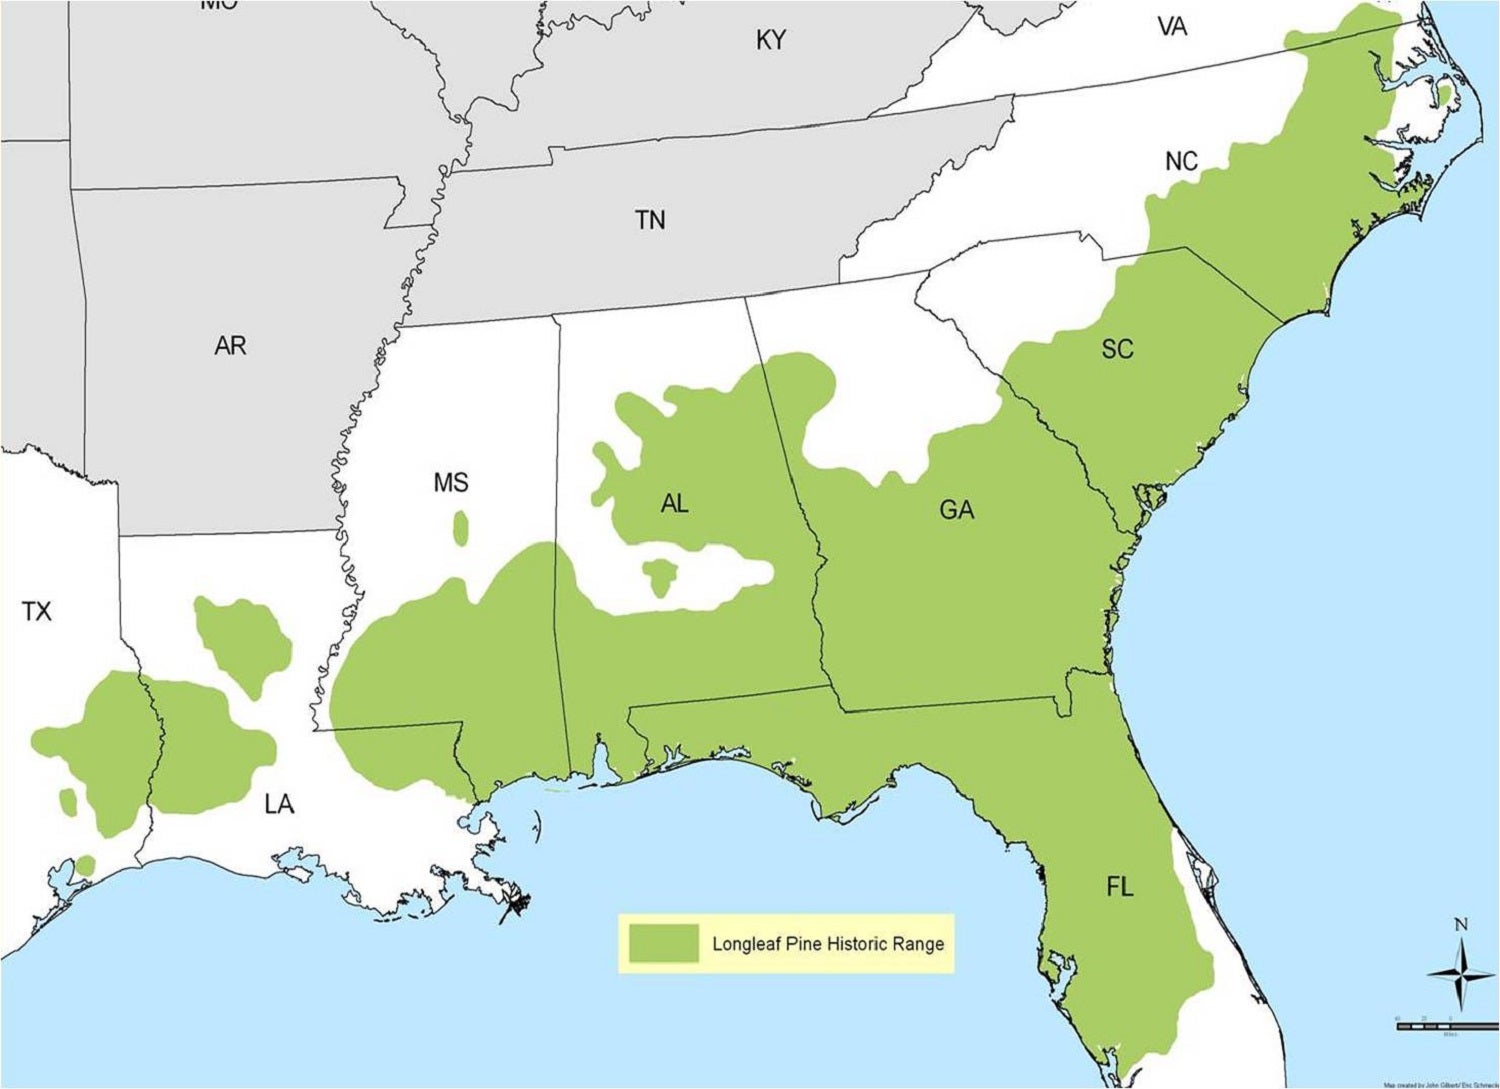 Longleaf pine historic range in Southeast US. Map is in white, gray, green, and blue.